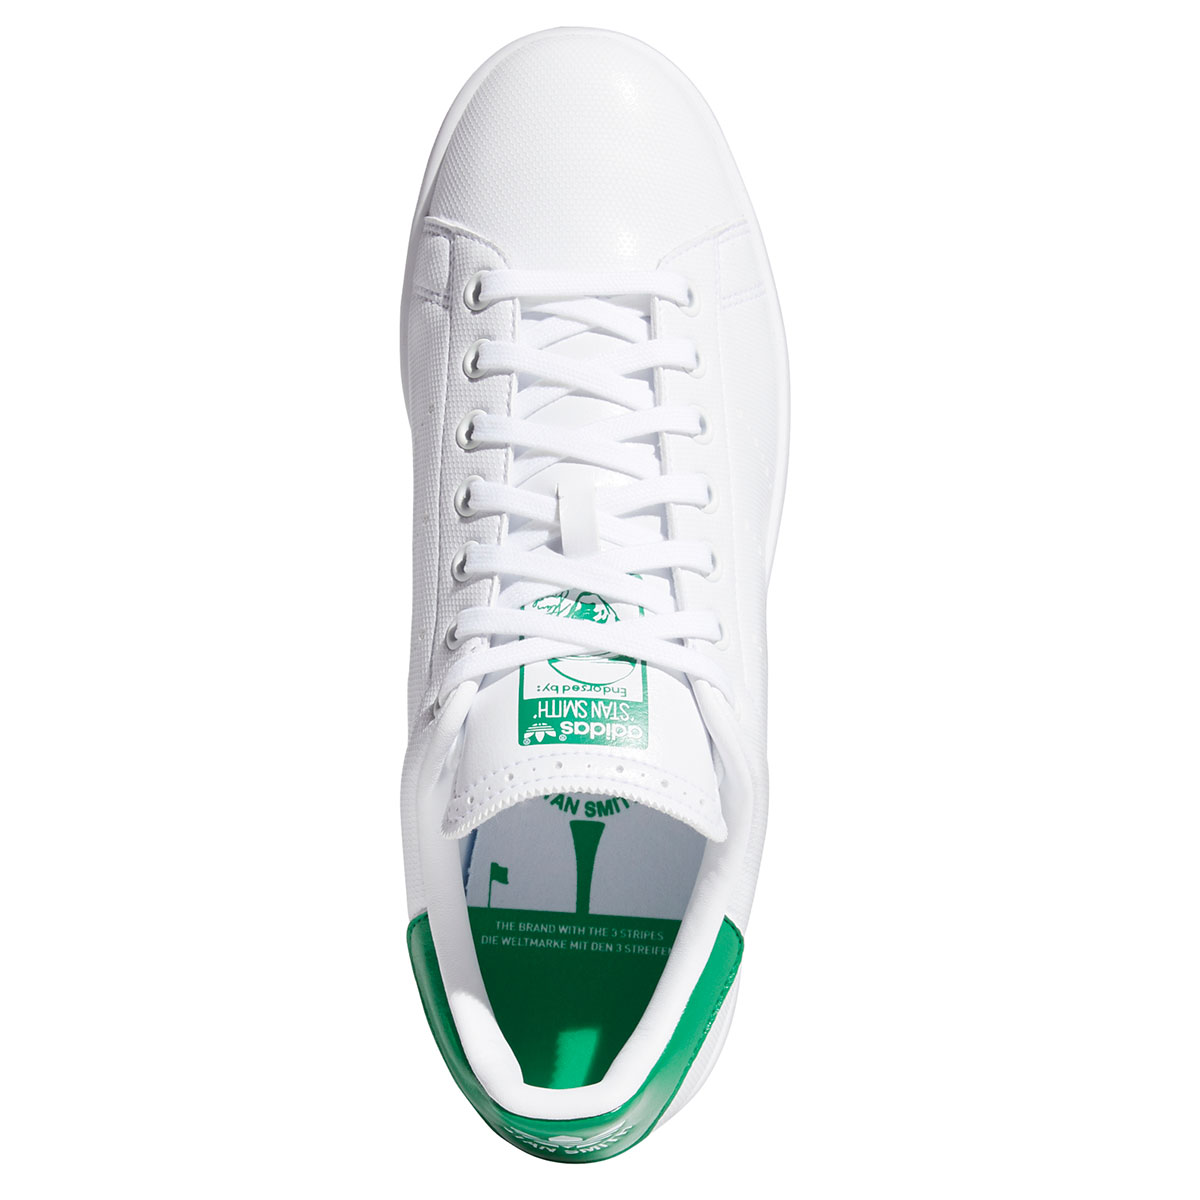 adidas Men's Stan Smith Spikeless Golf Shoes from american golf